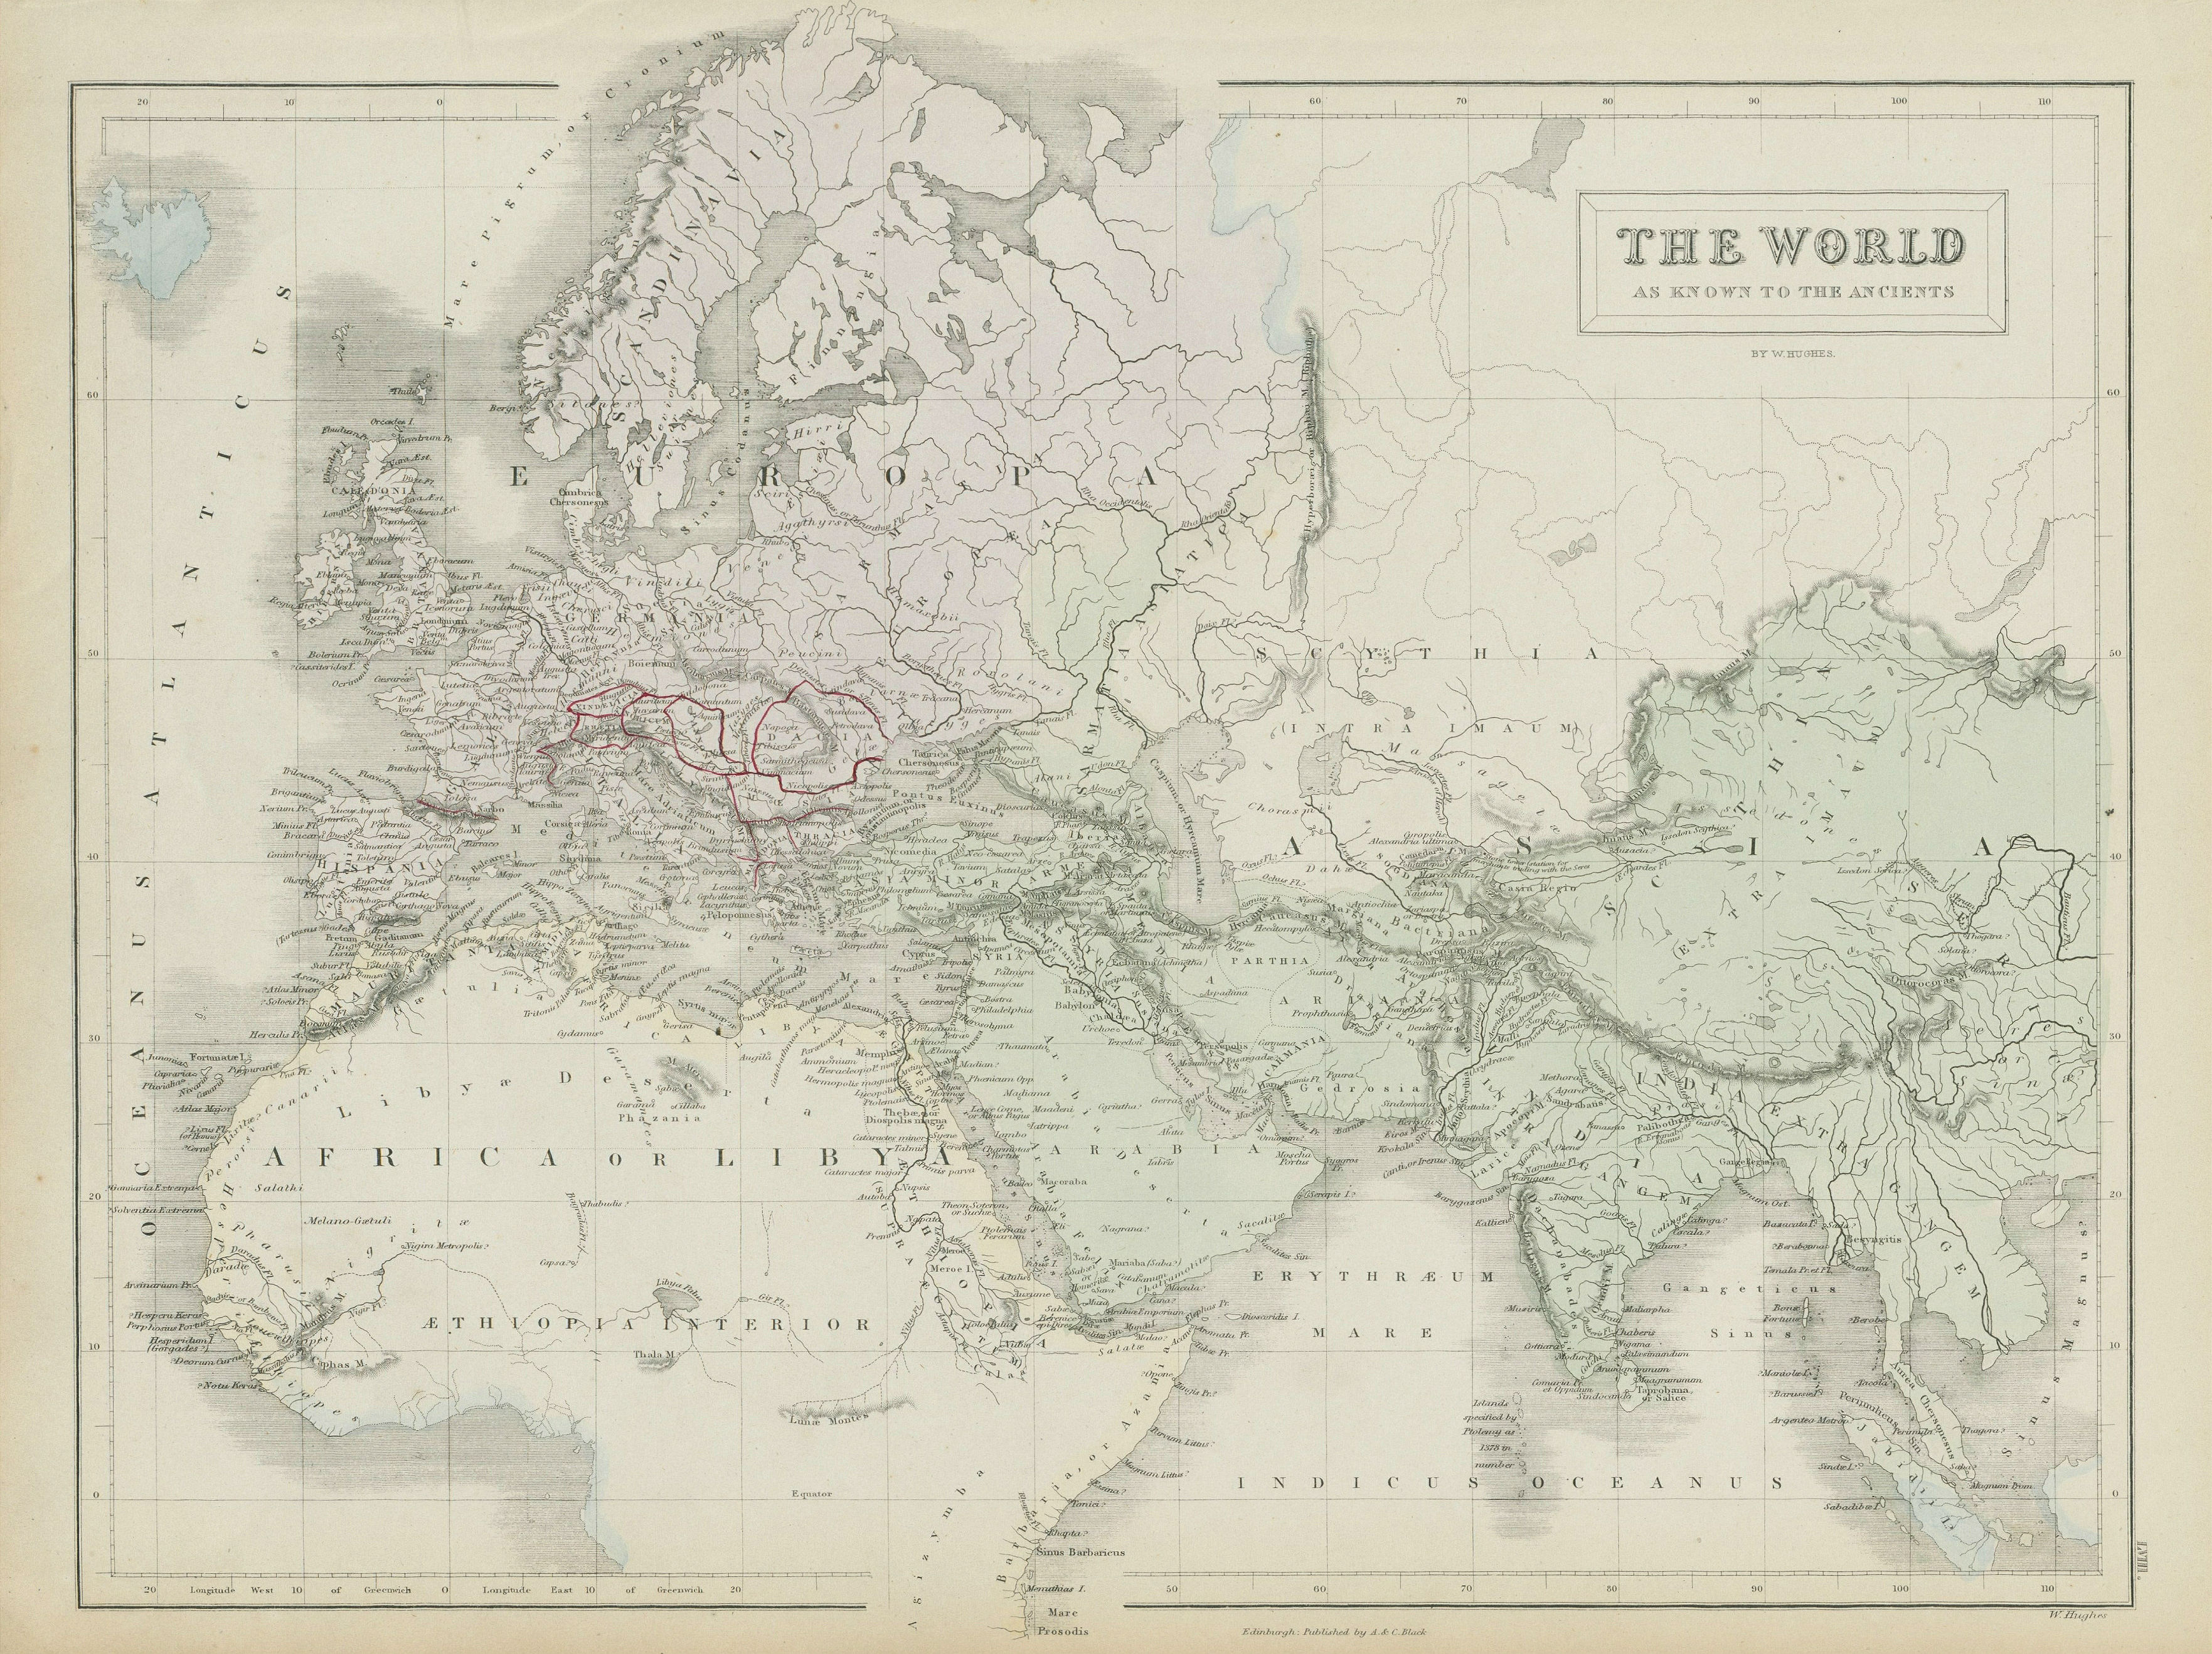 Associate Product The World as known to the Ancients, by WILLIAM HUGHES 1856 old antique map